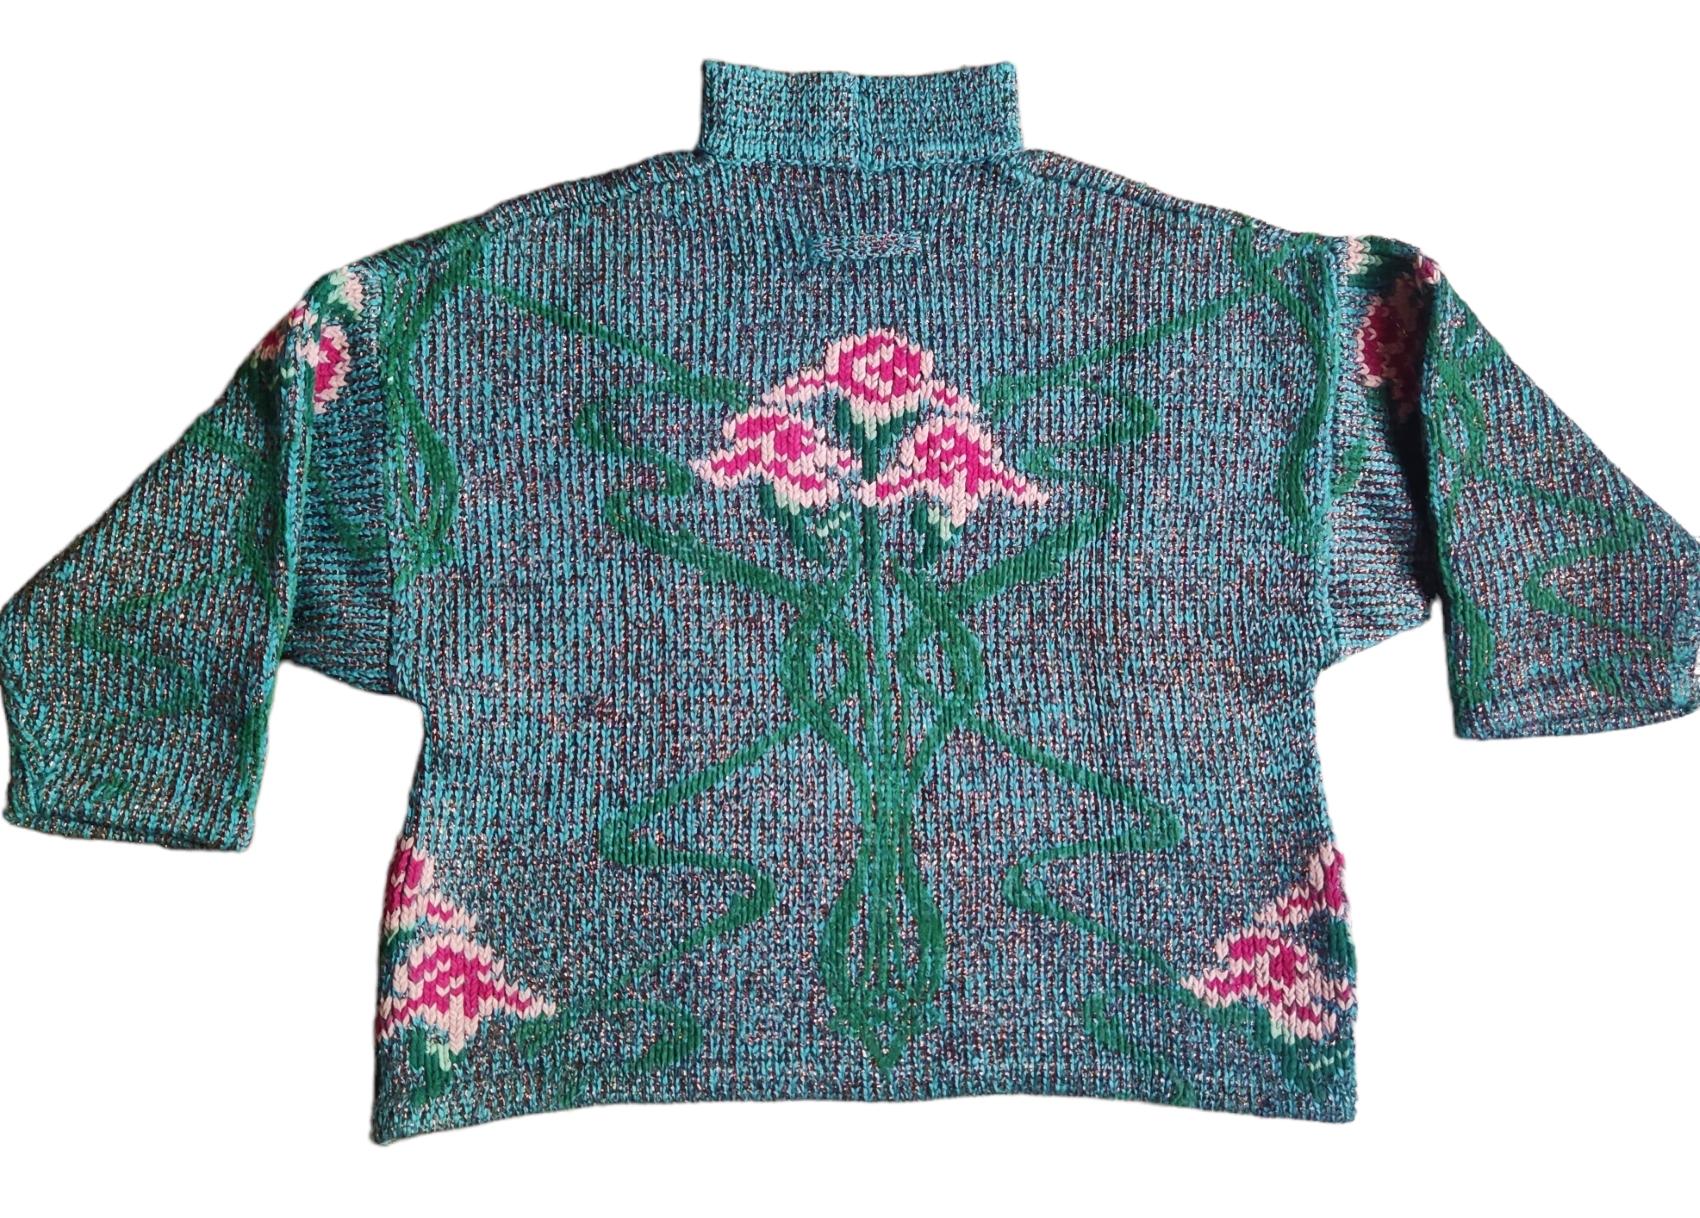 Lurex sweater by Jean Paul Gaultier from the Autumn Winter 1984 collection!
This sweater is constructed of pink flowers knit with chenille yarn, and copper colored lurex which gives it a subtle sheen, ascribing an ‘80s glam accentuation to the